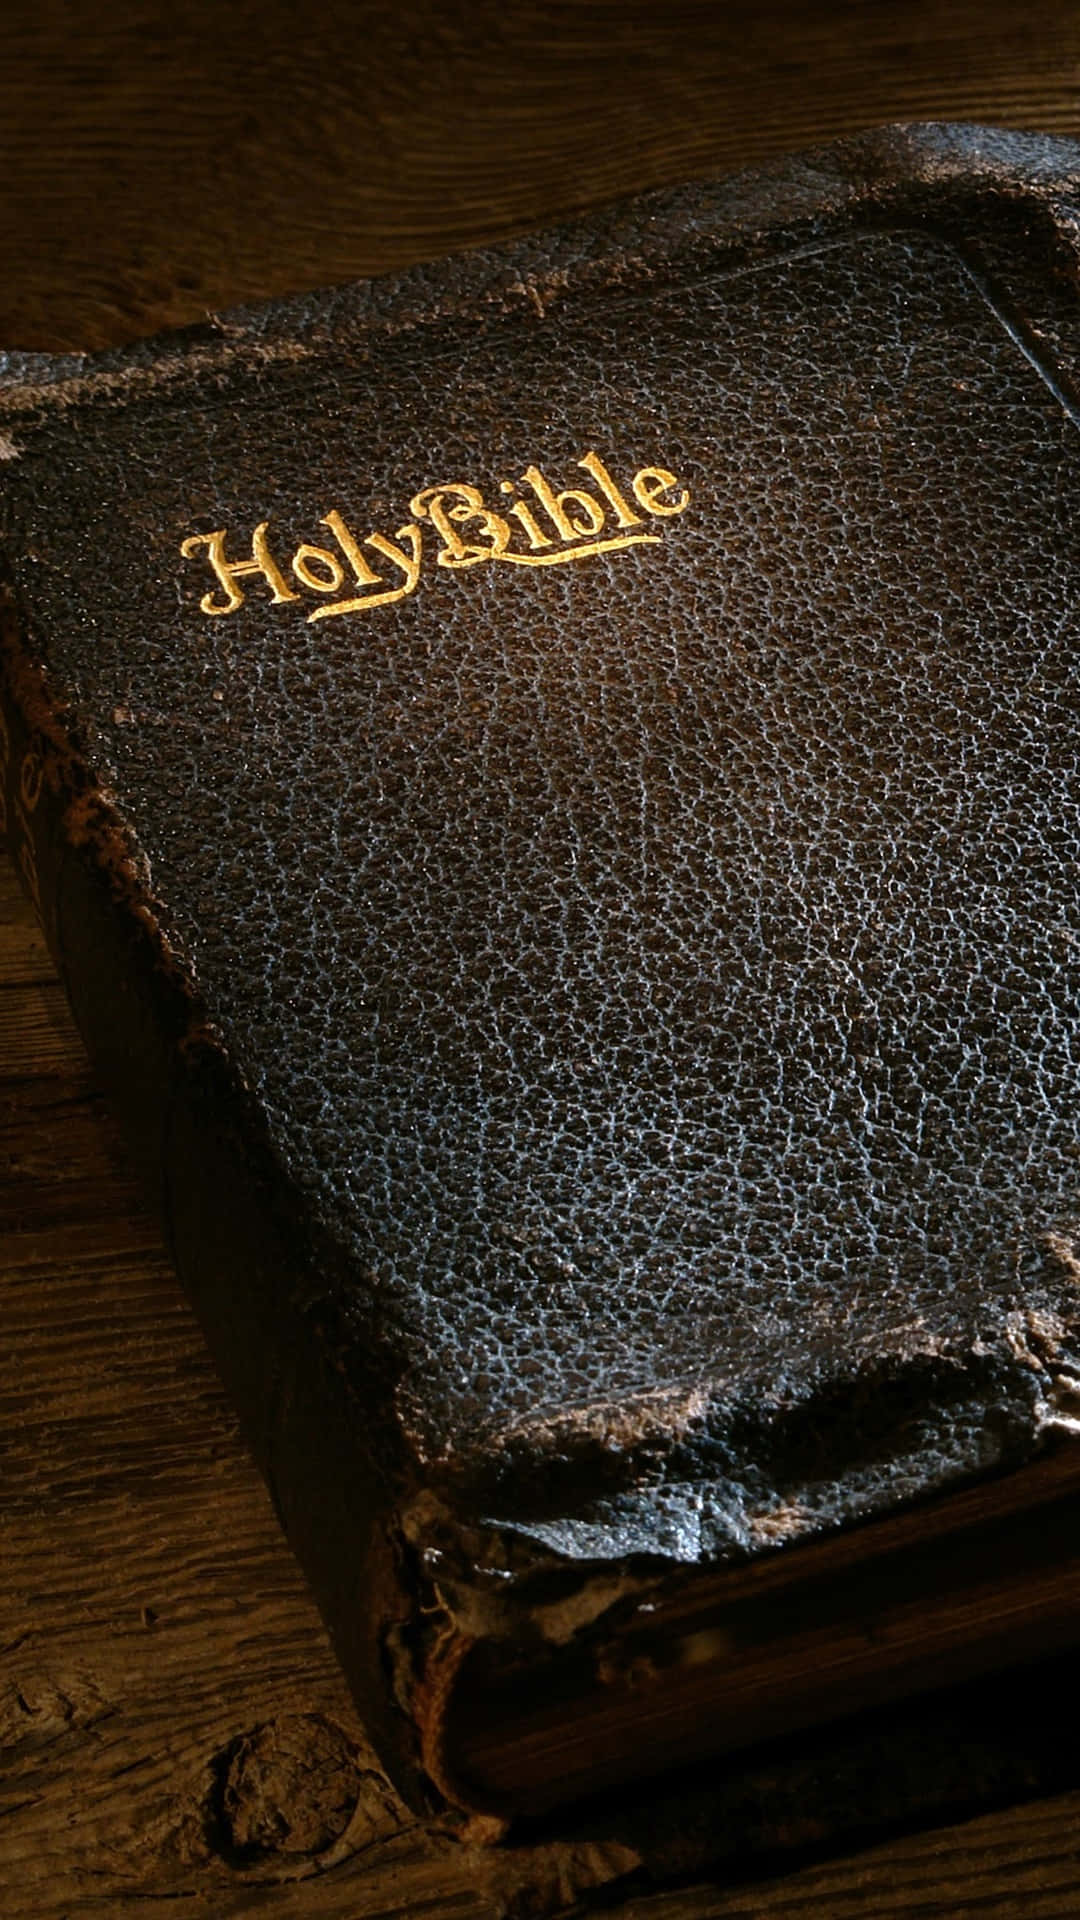 Black Leather Holy Bible Wallpaper